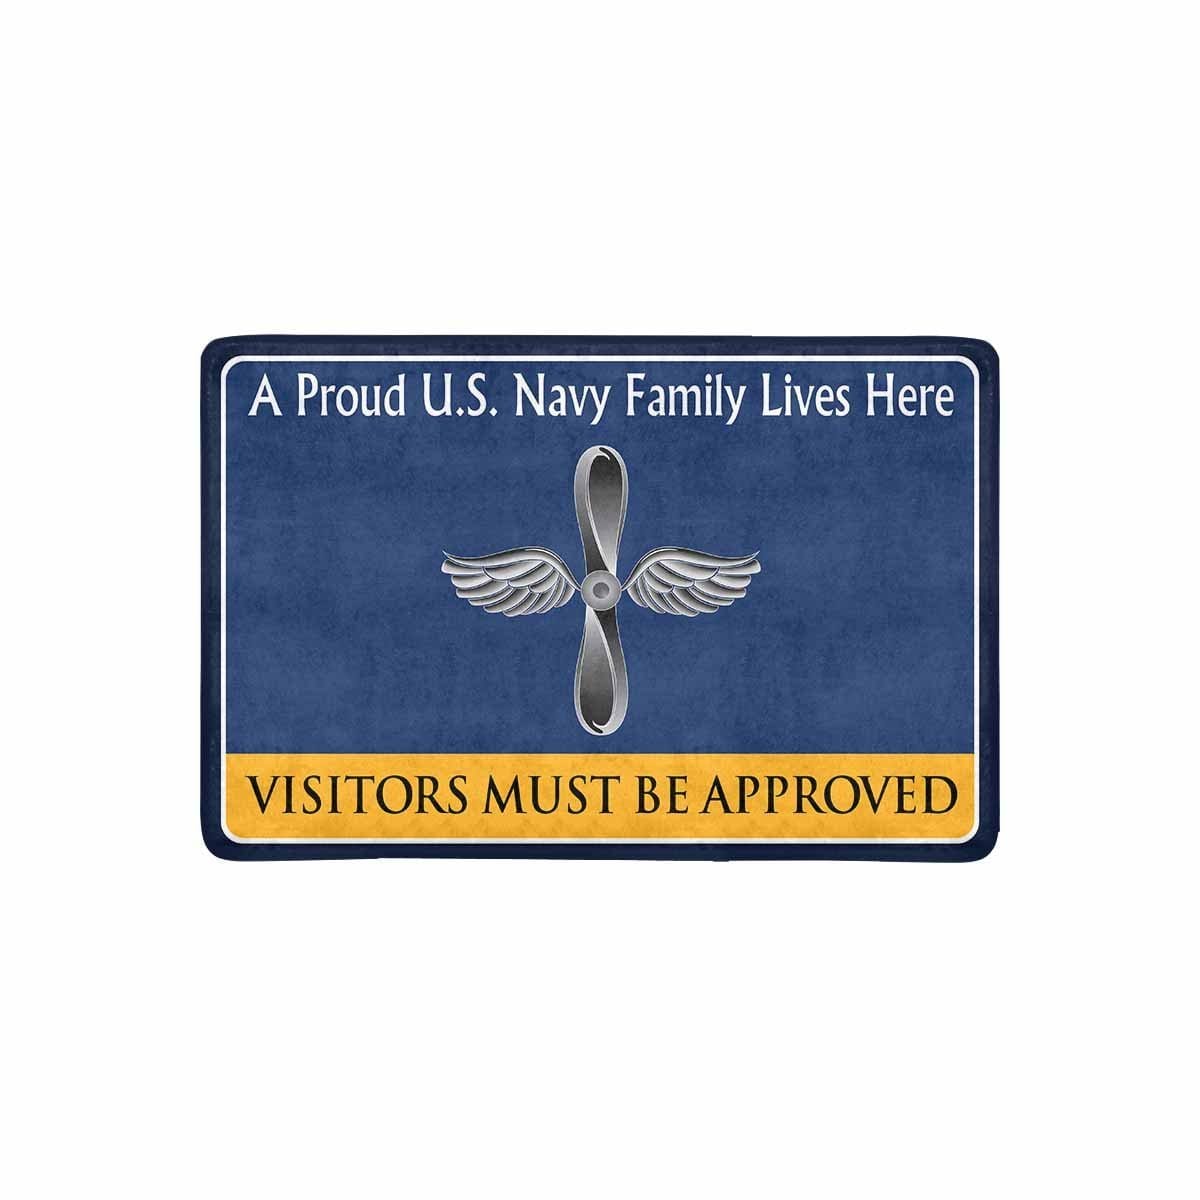 U.S Navy Aviation machinist's mate Navy AD Family Doormat - Visitors must be approved (23,6 inches x 15,7 inches)-Doormat-Navy-Rate-Veterans Nation